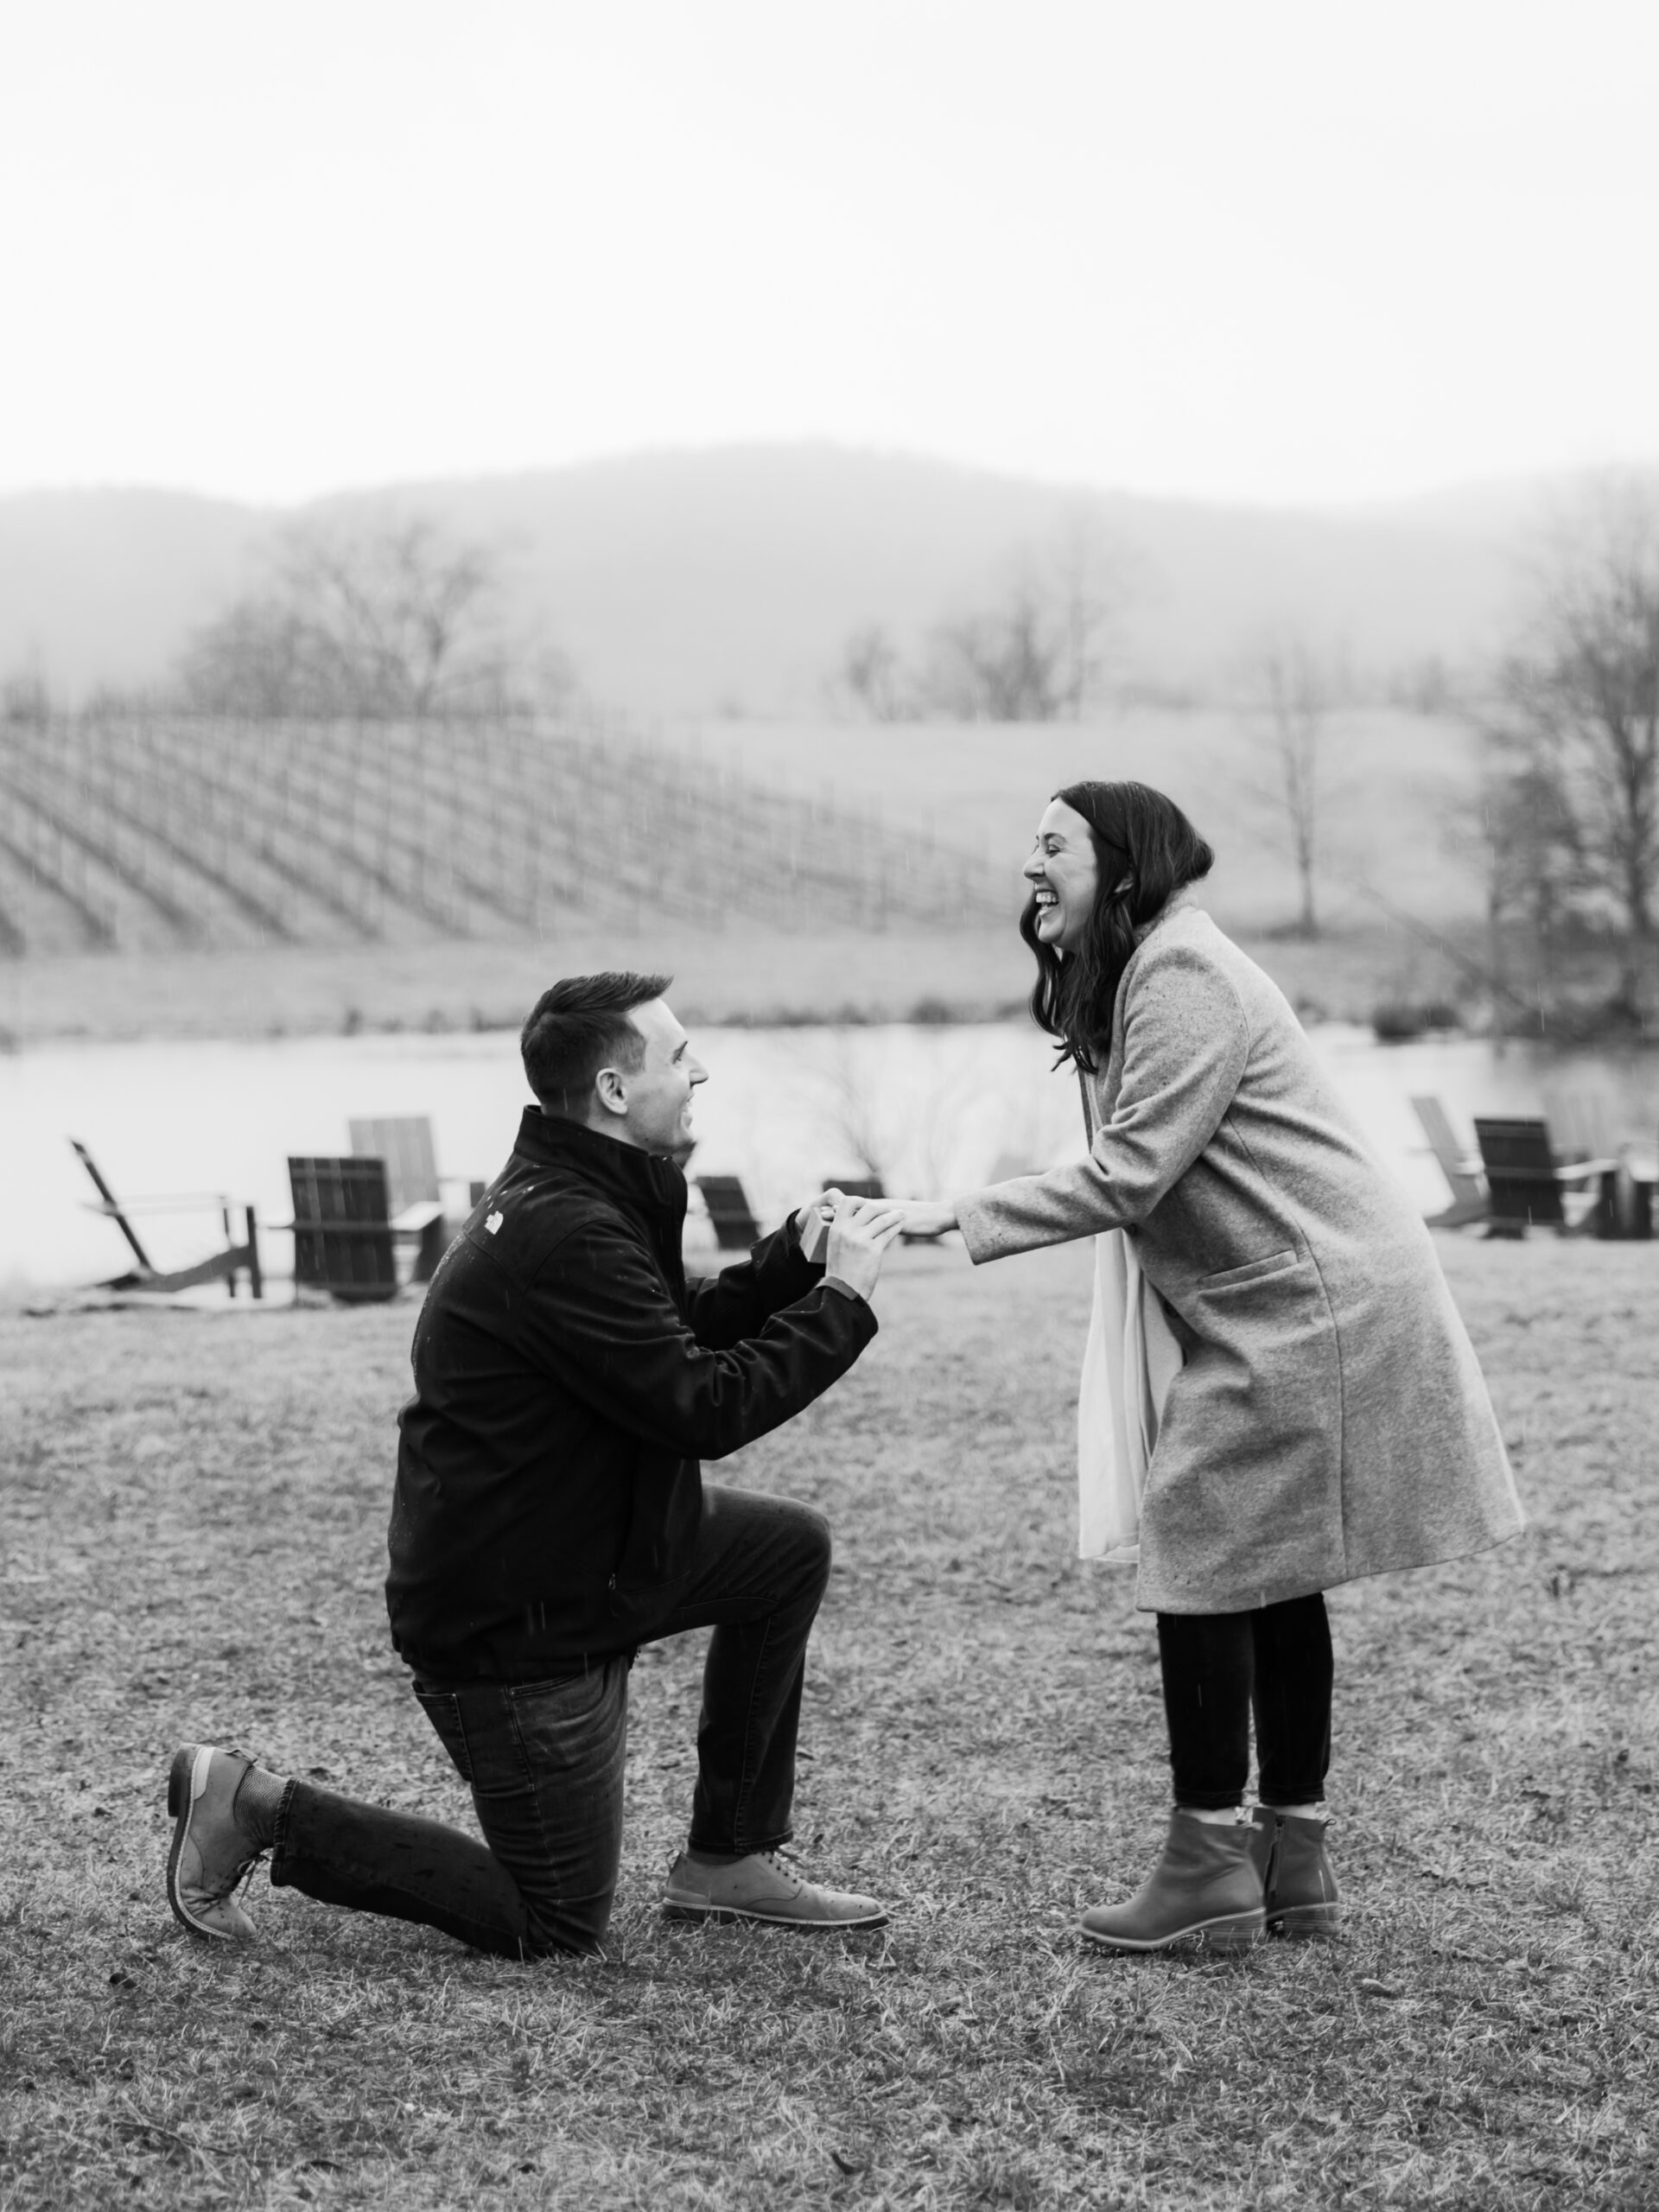 A man proposing to his girlfriend in front of a winery in virginia